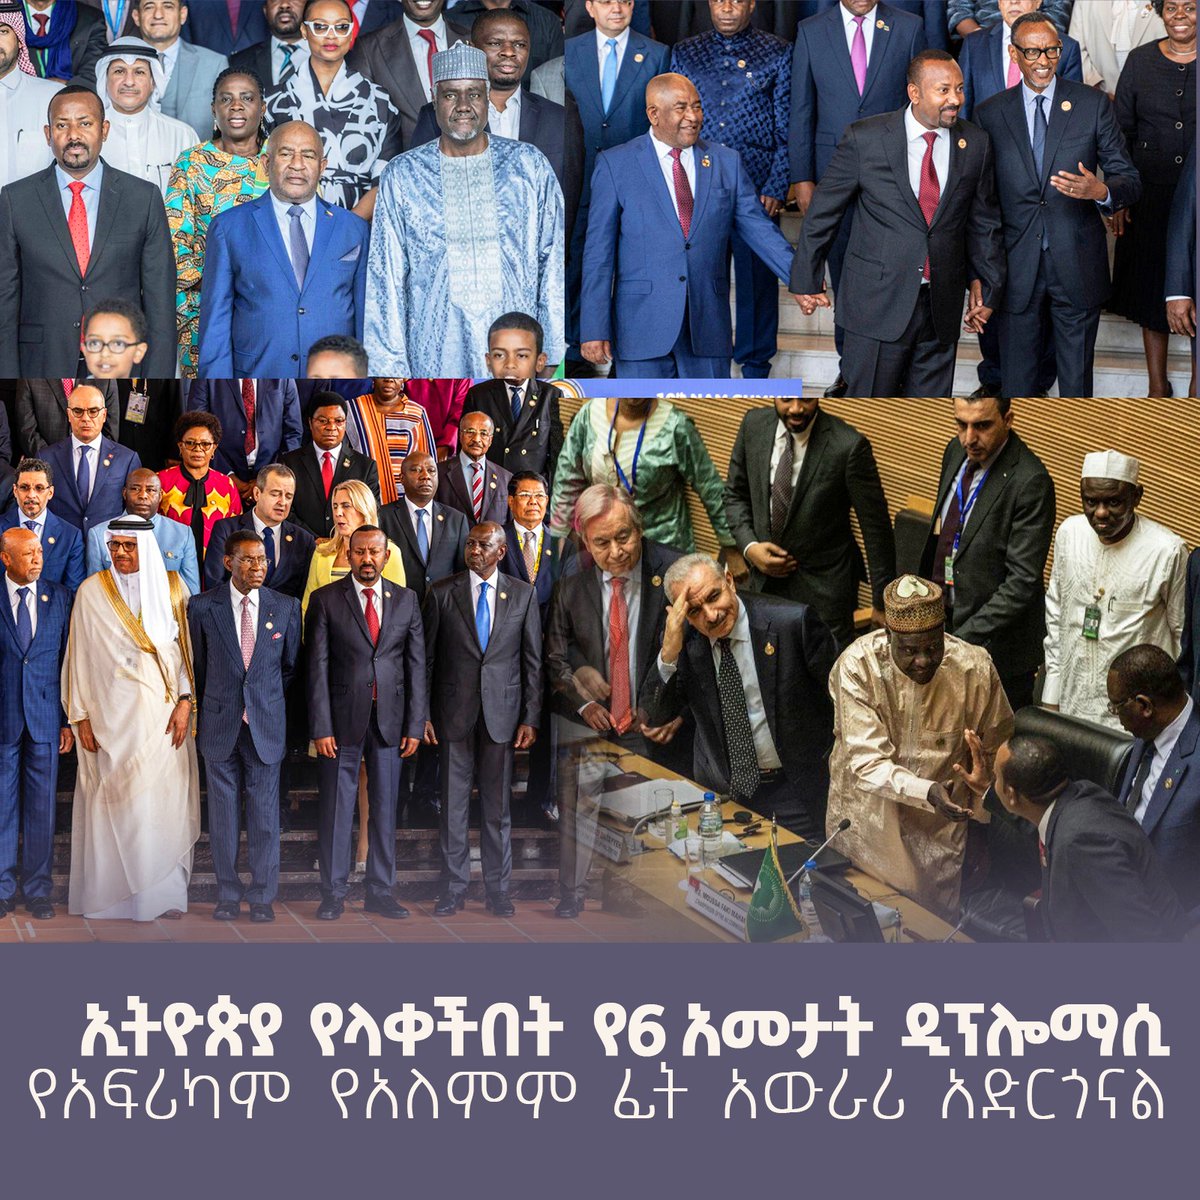 PM Abiy Ahmed's diplomacy and leadership resulted in the signing of the Pretoria Peace Agreement through an Ethiopian-owned and AU-facilitated process. #PanAfricanism #AU #Ethiopia